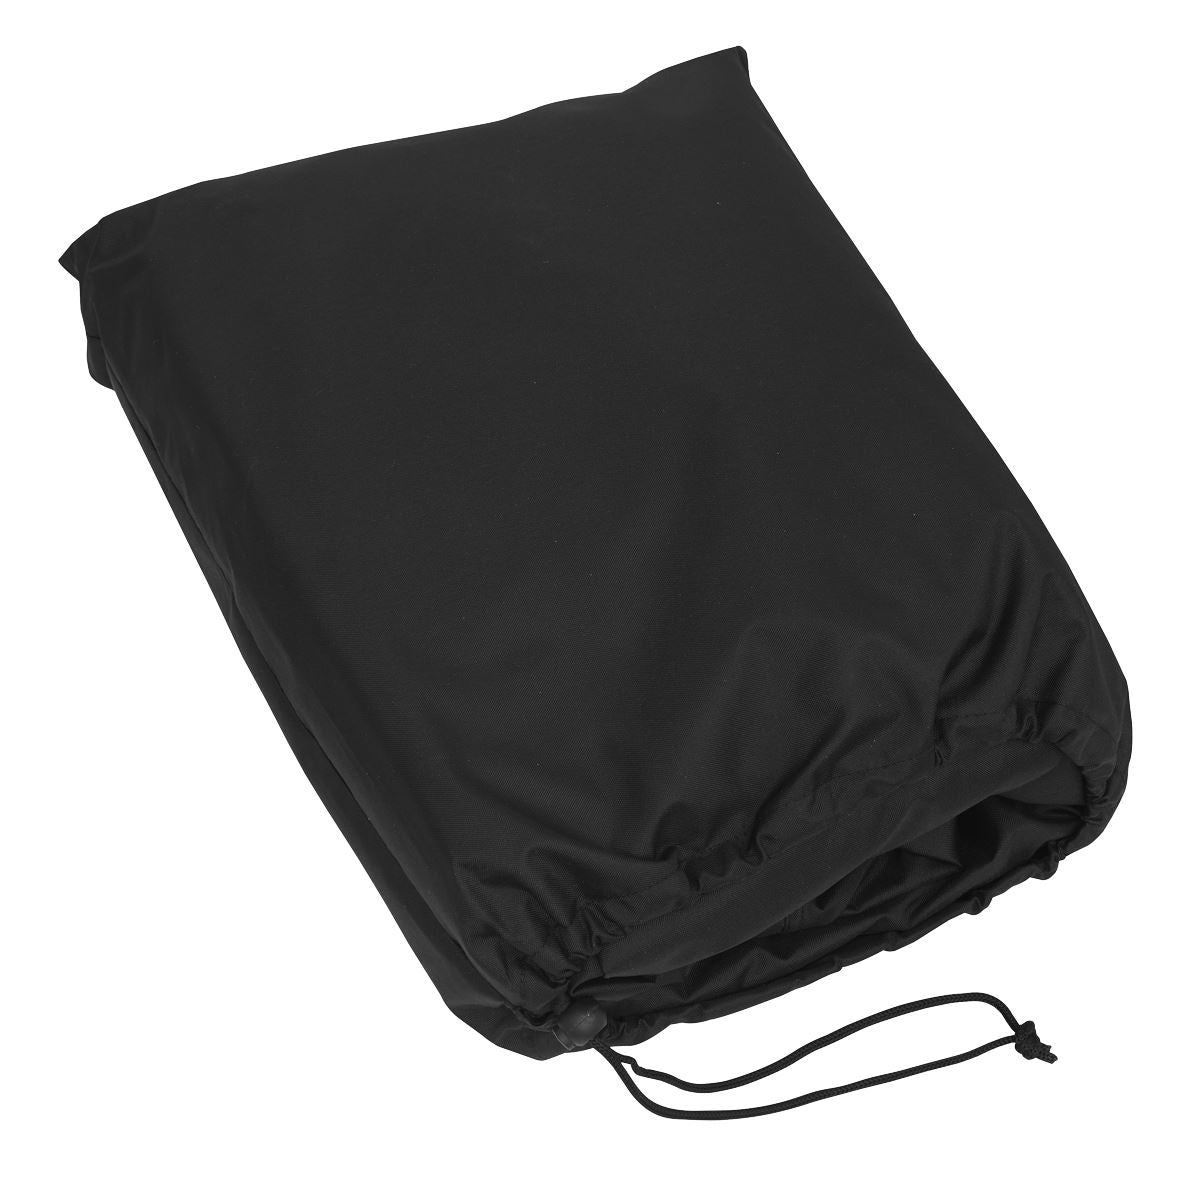 Sealey Motorcycle Transport Cover - Large